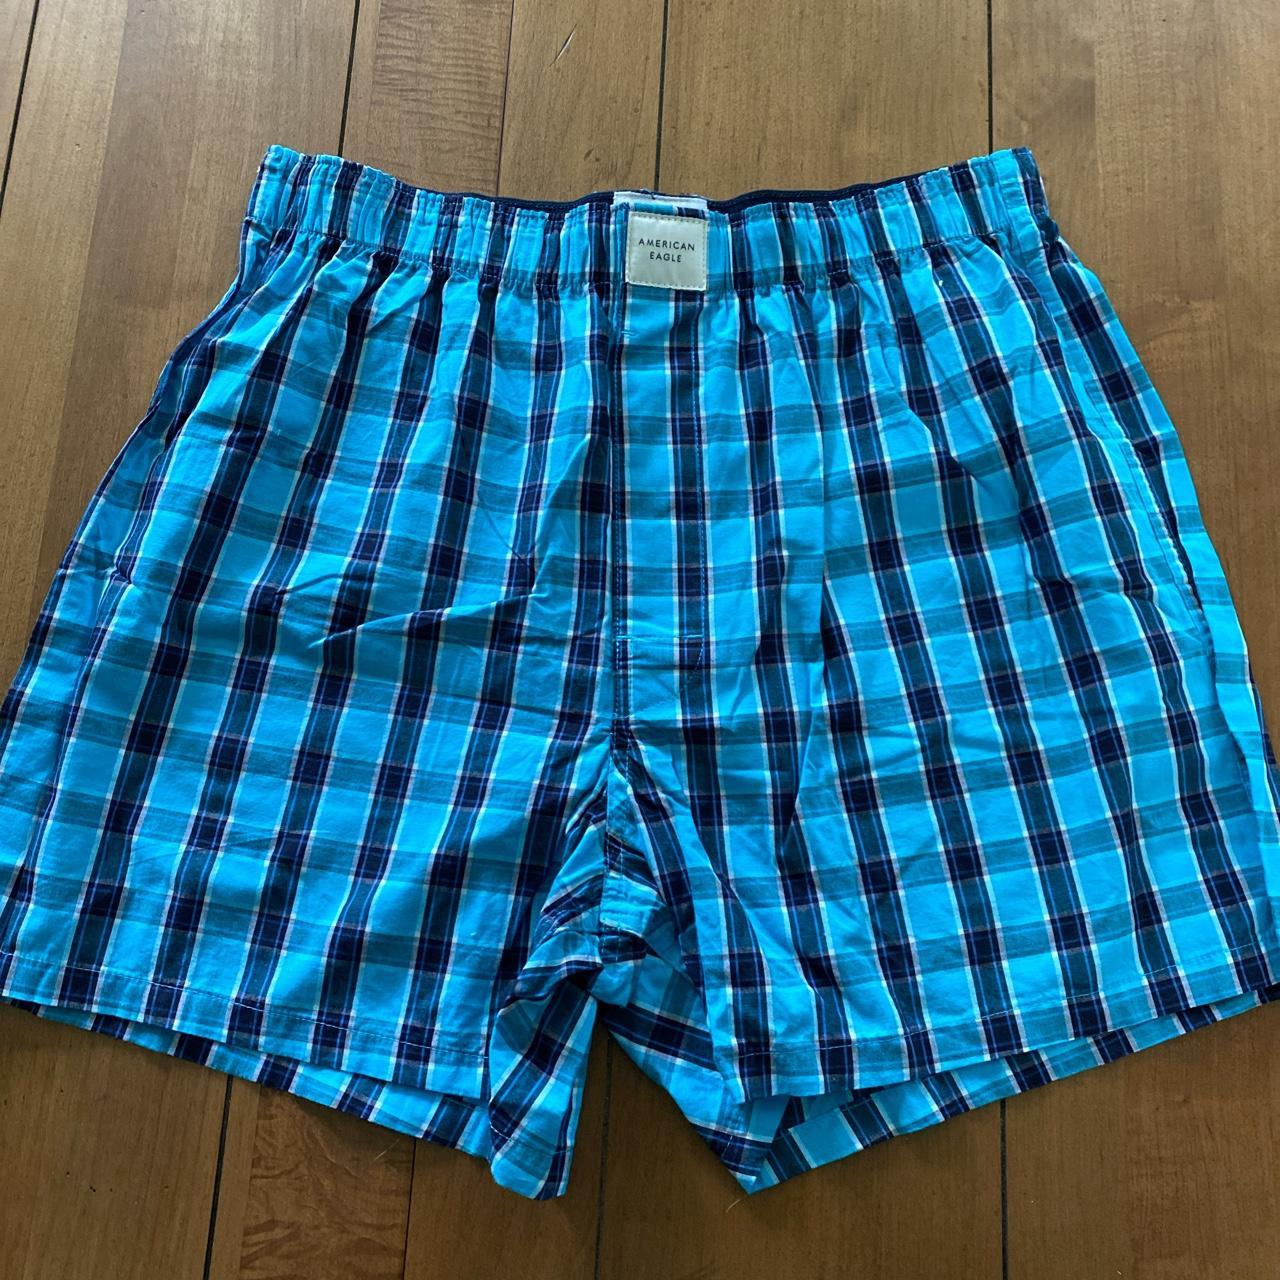 Pack of 7 American Eagle boxer shorts; all size... - Depop